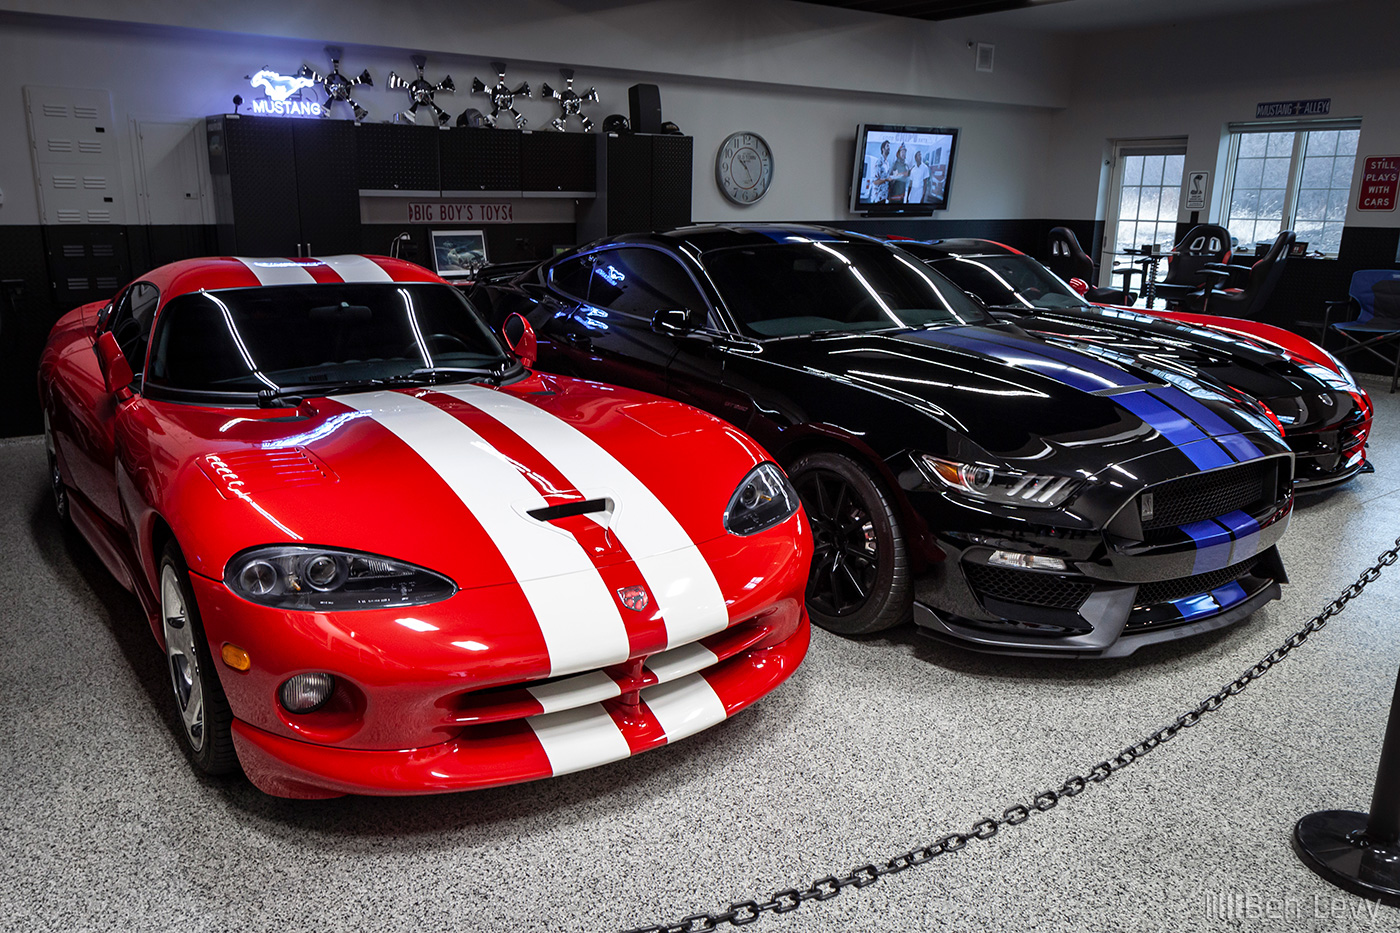 Dodge Viper and Ford Mustang Shelby GT350